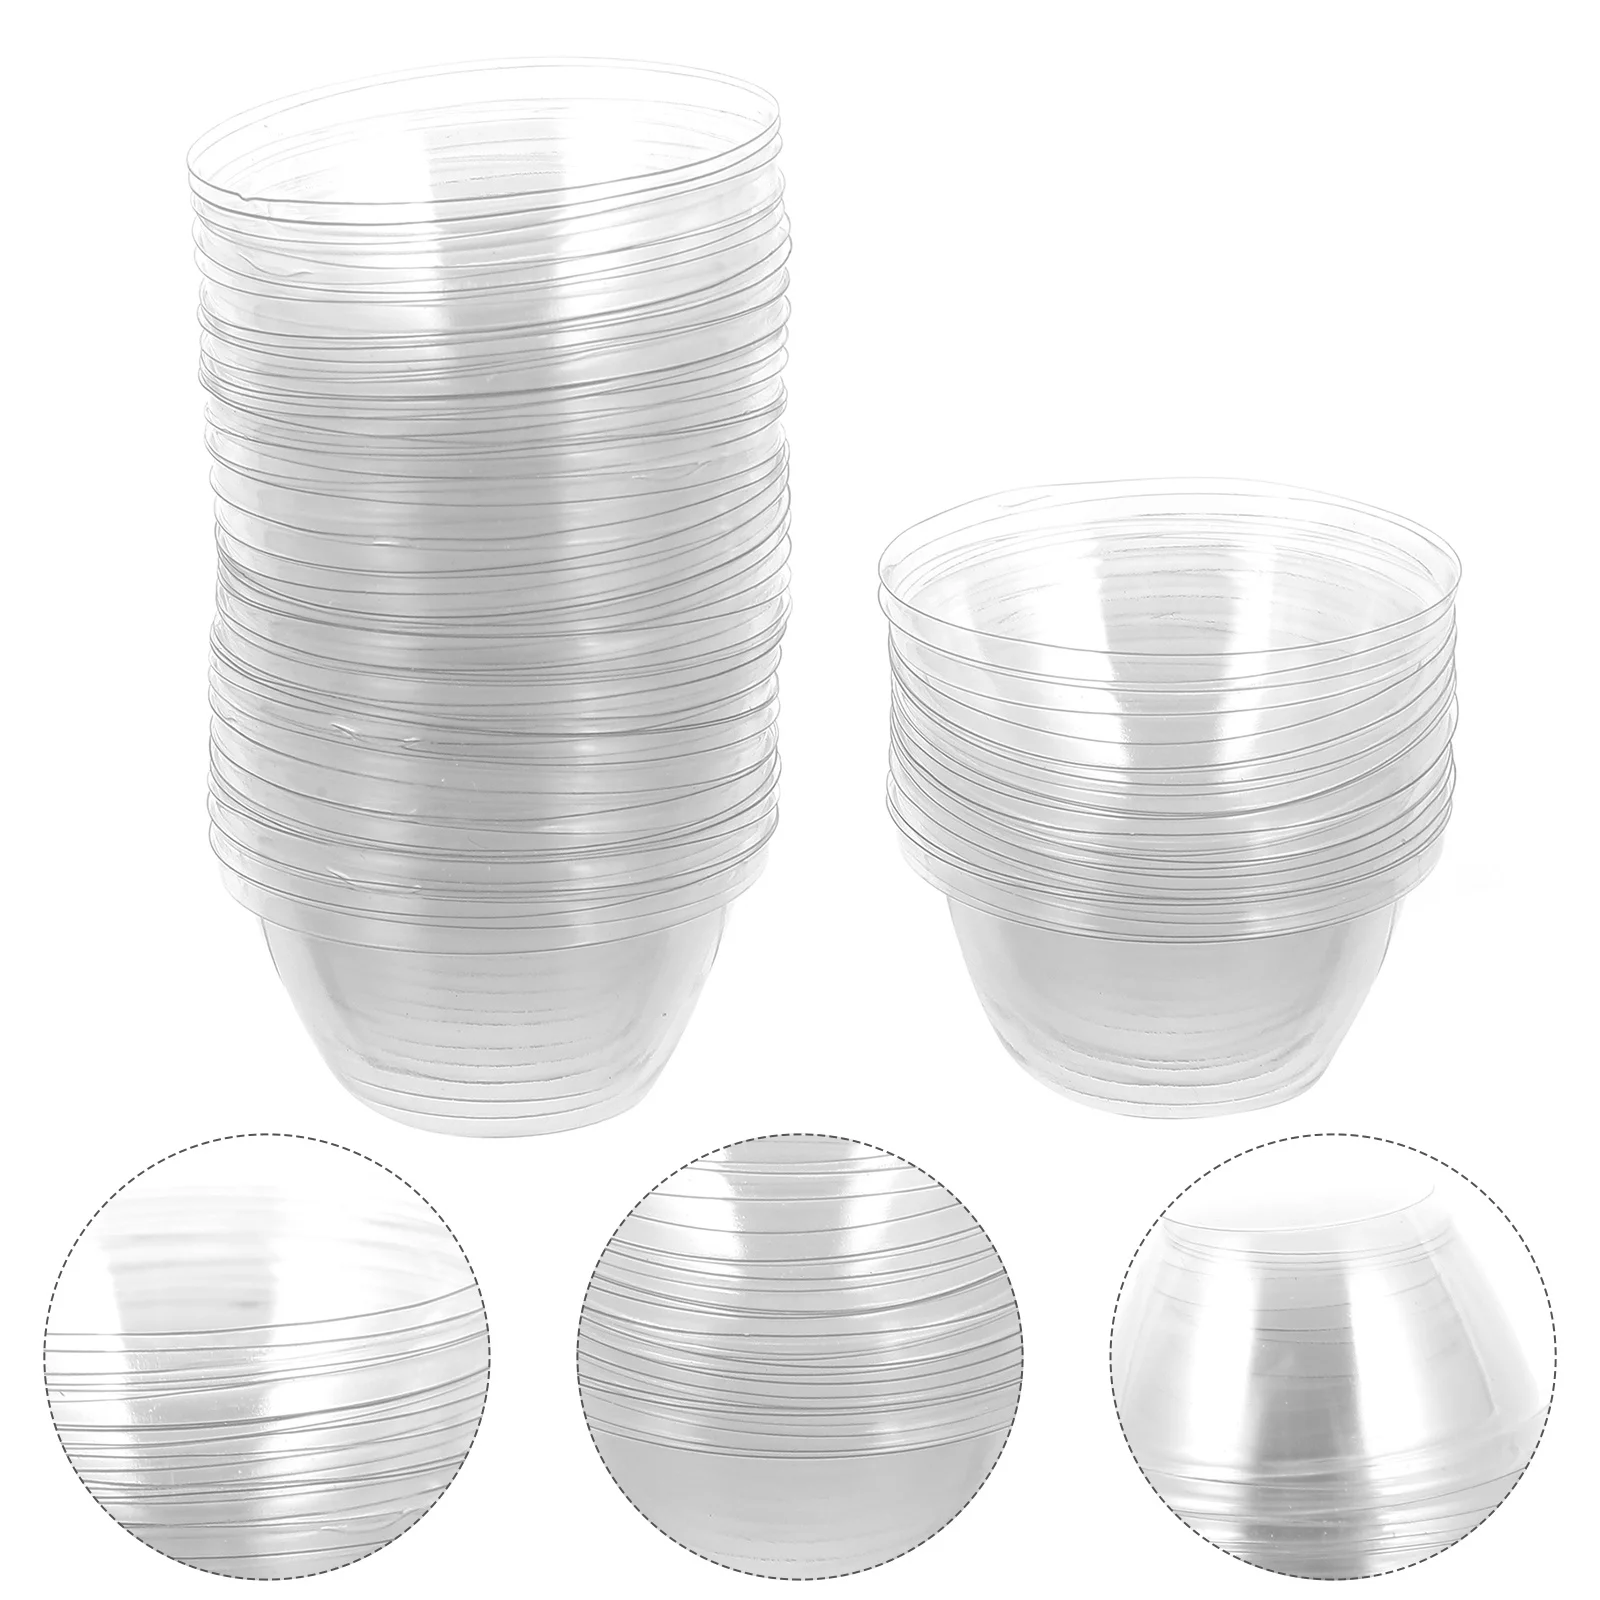 

50 Pcs Thermal Cover Hydroponic Transparent Hydroponics Growing Clear Cups Soilless Plastic Planting Dome Lids